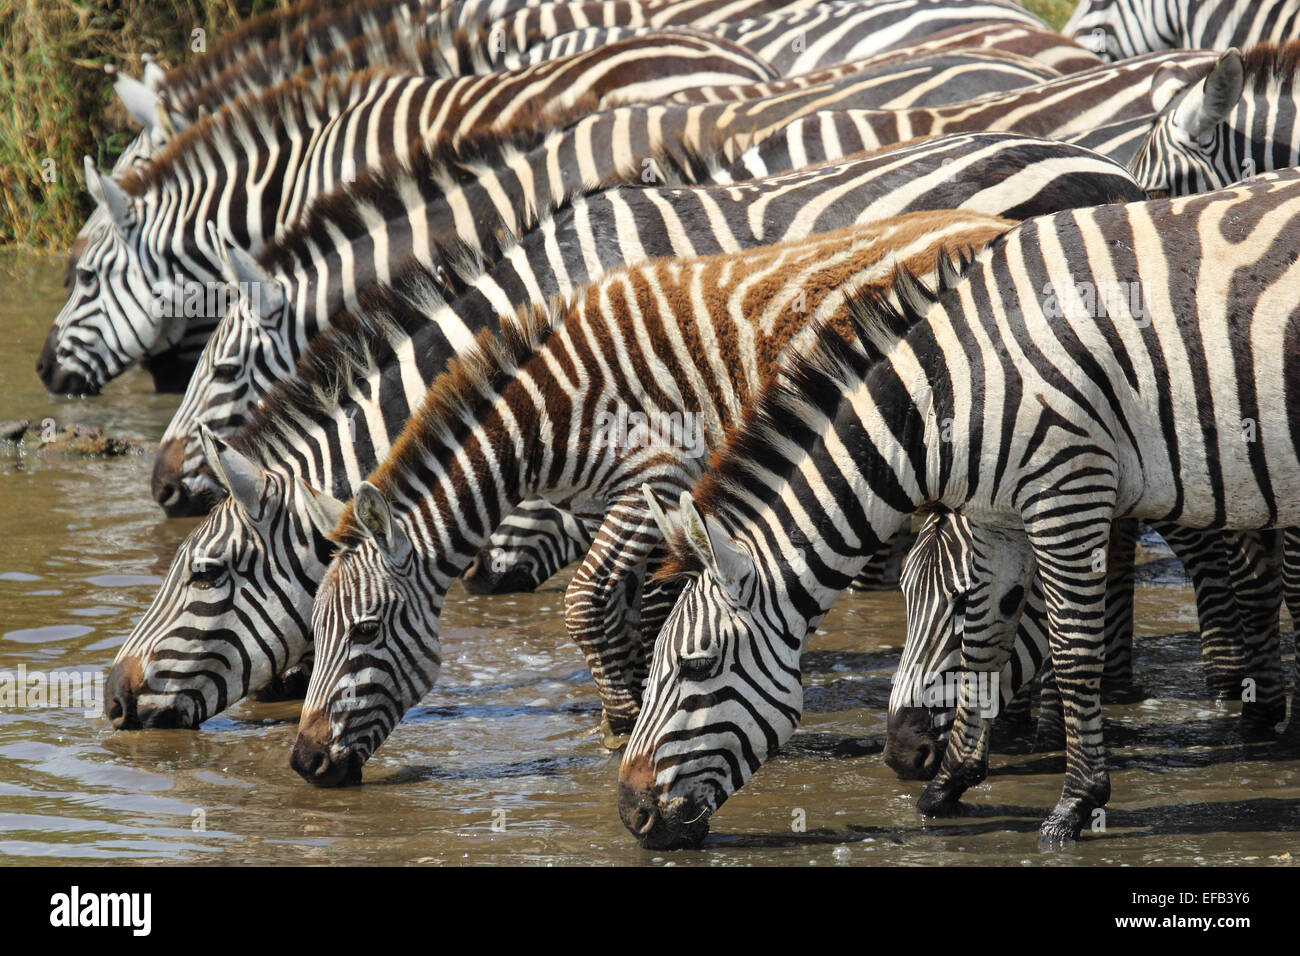 A group of common zebras, Equus Quagga, drinking from a waterhole in Serengeti National Park, Tanzania Stock Photo